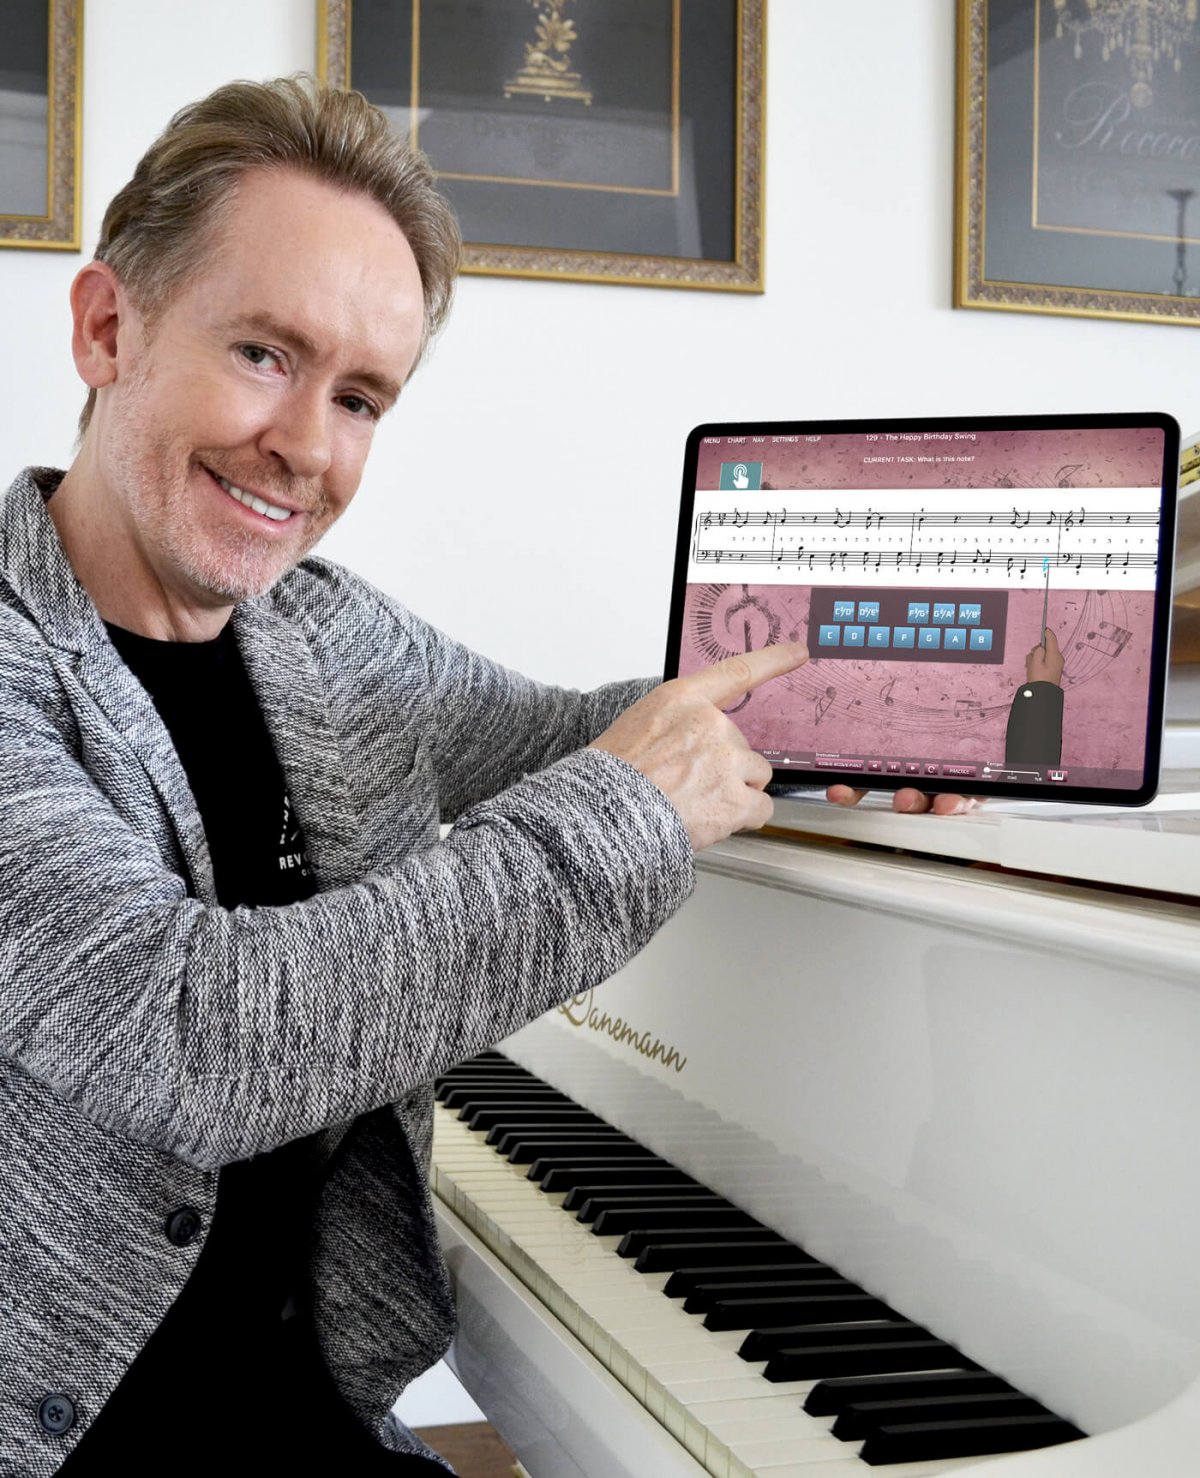 Musiah Inventor showing new iPad piano lessons app Musiah 